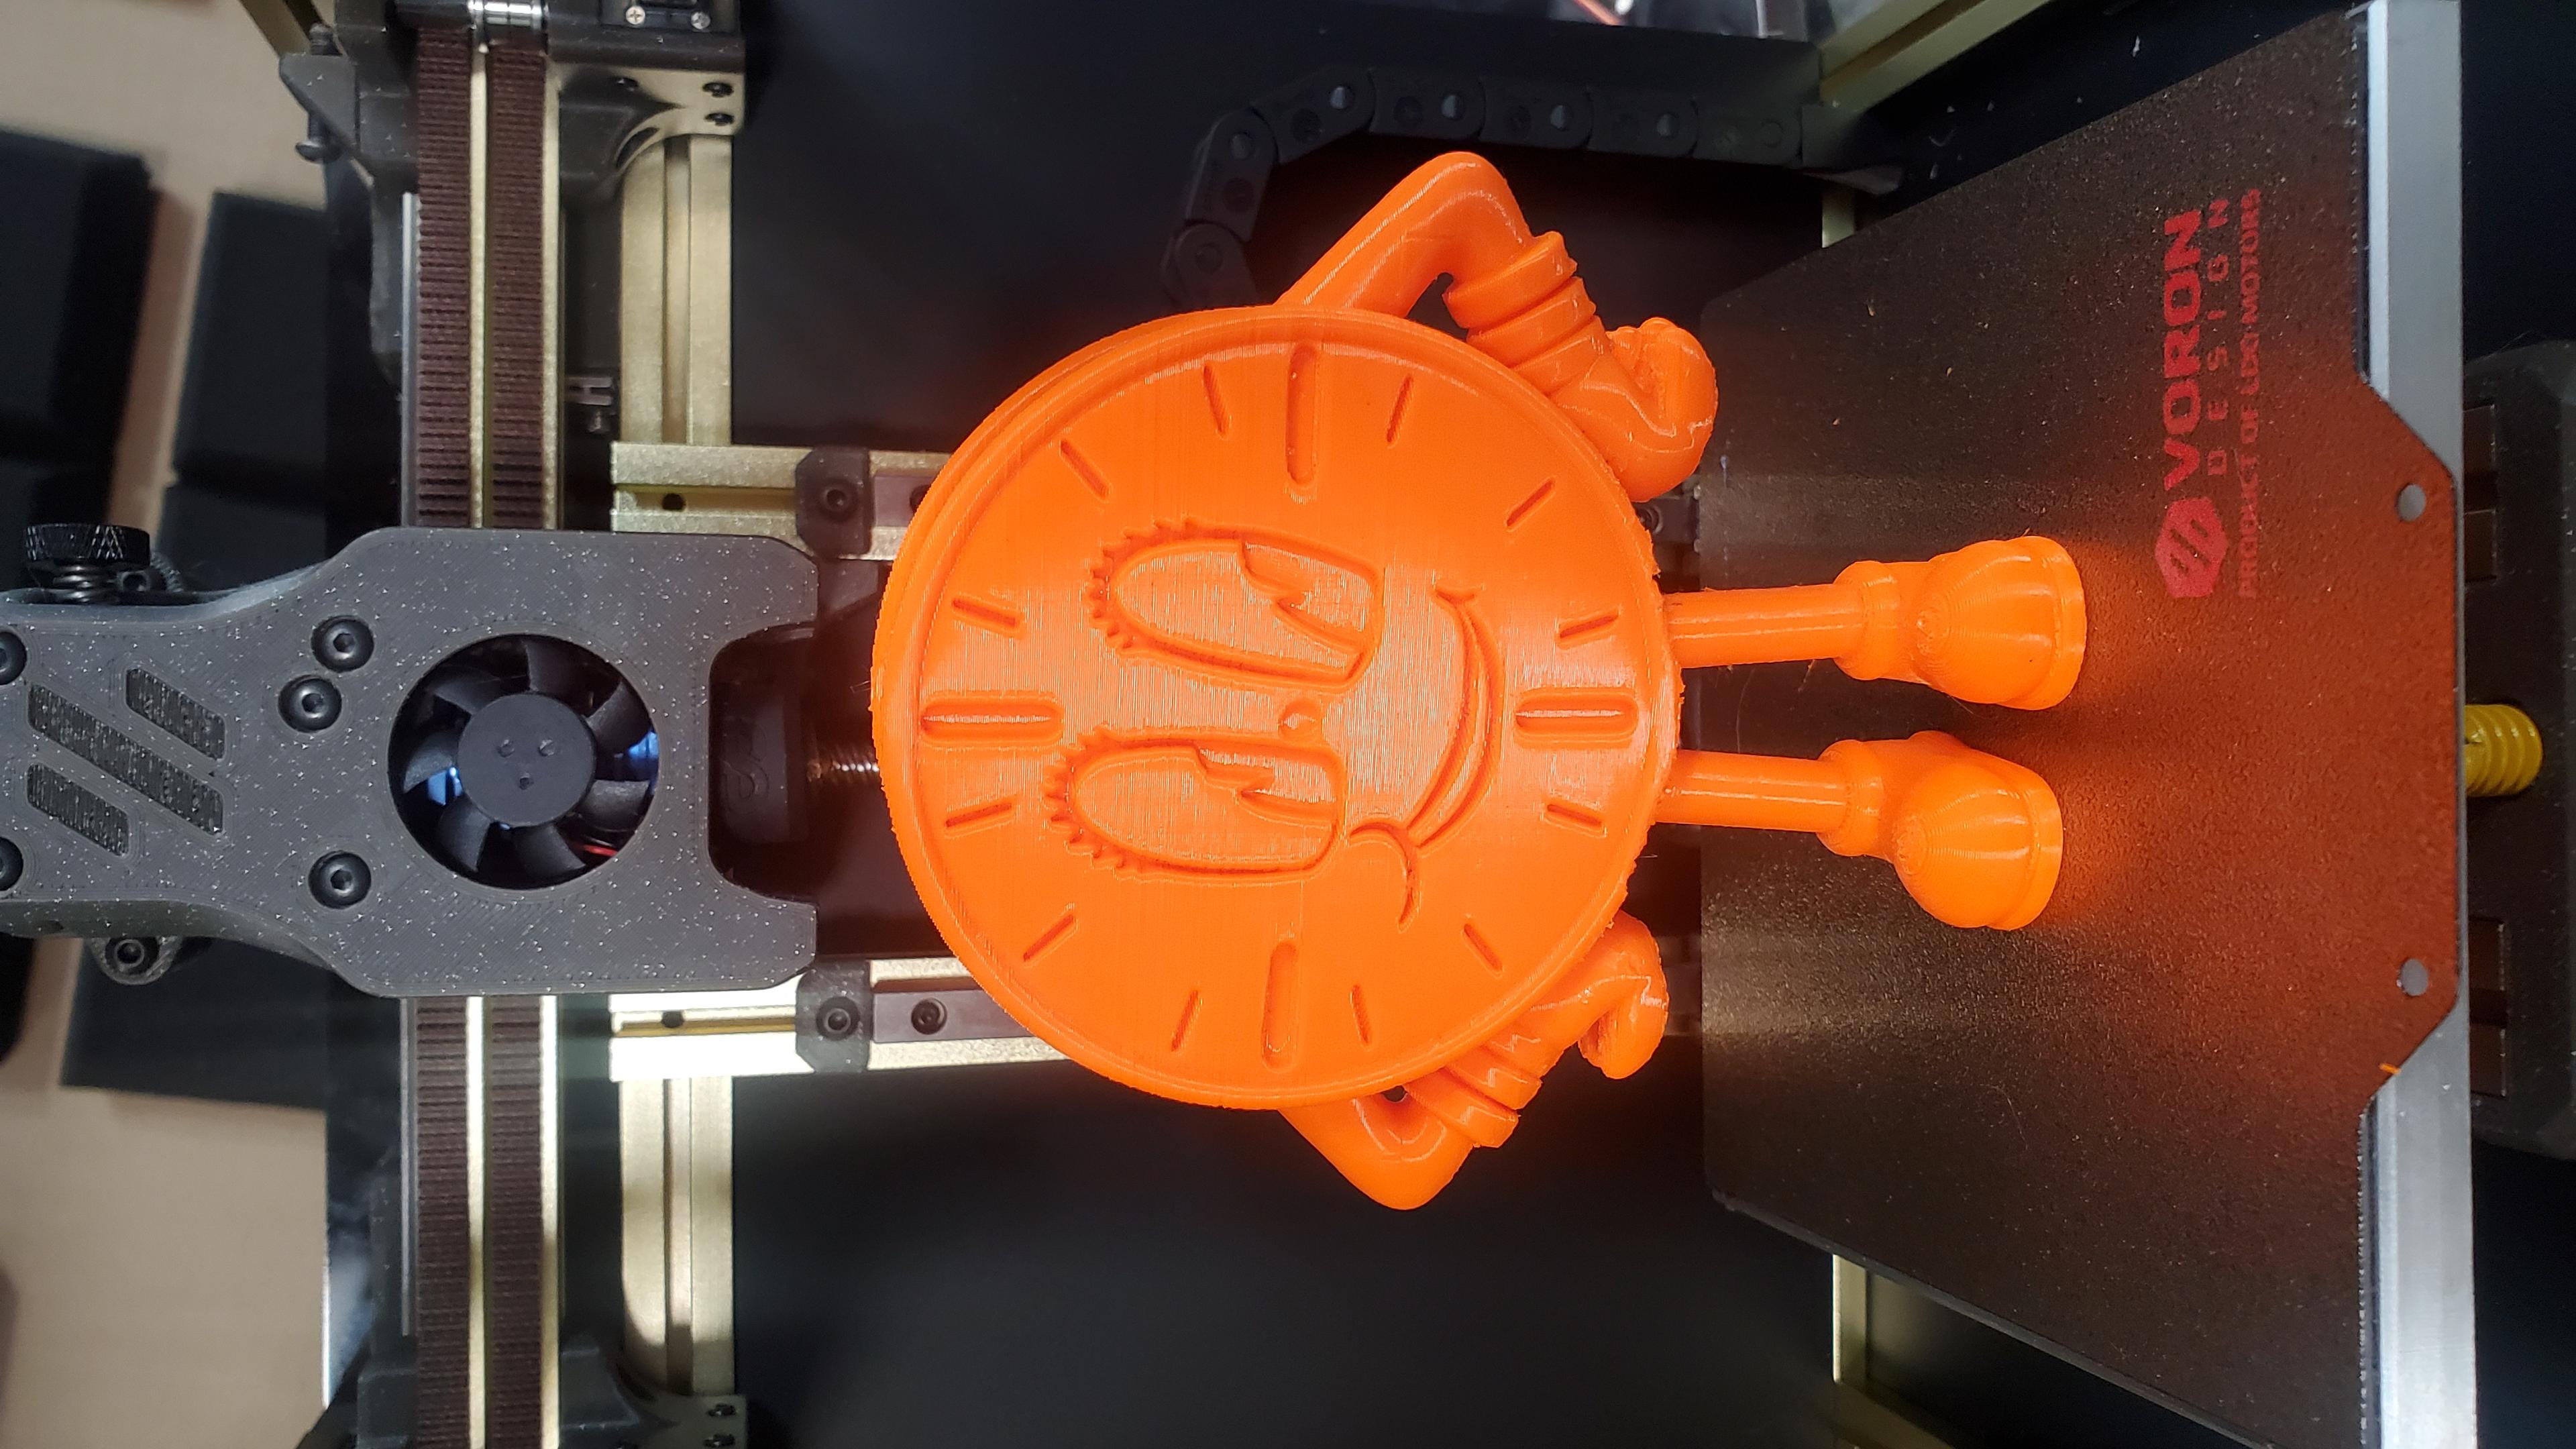 Miss Minutes - HEY Y'ALL
voron v0.1
.15mm lh .4mm nozzle
Jessie pla mystery orange - 3d model